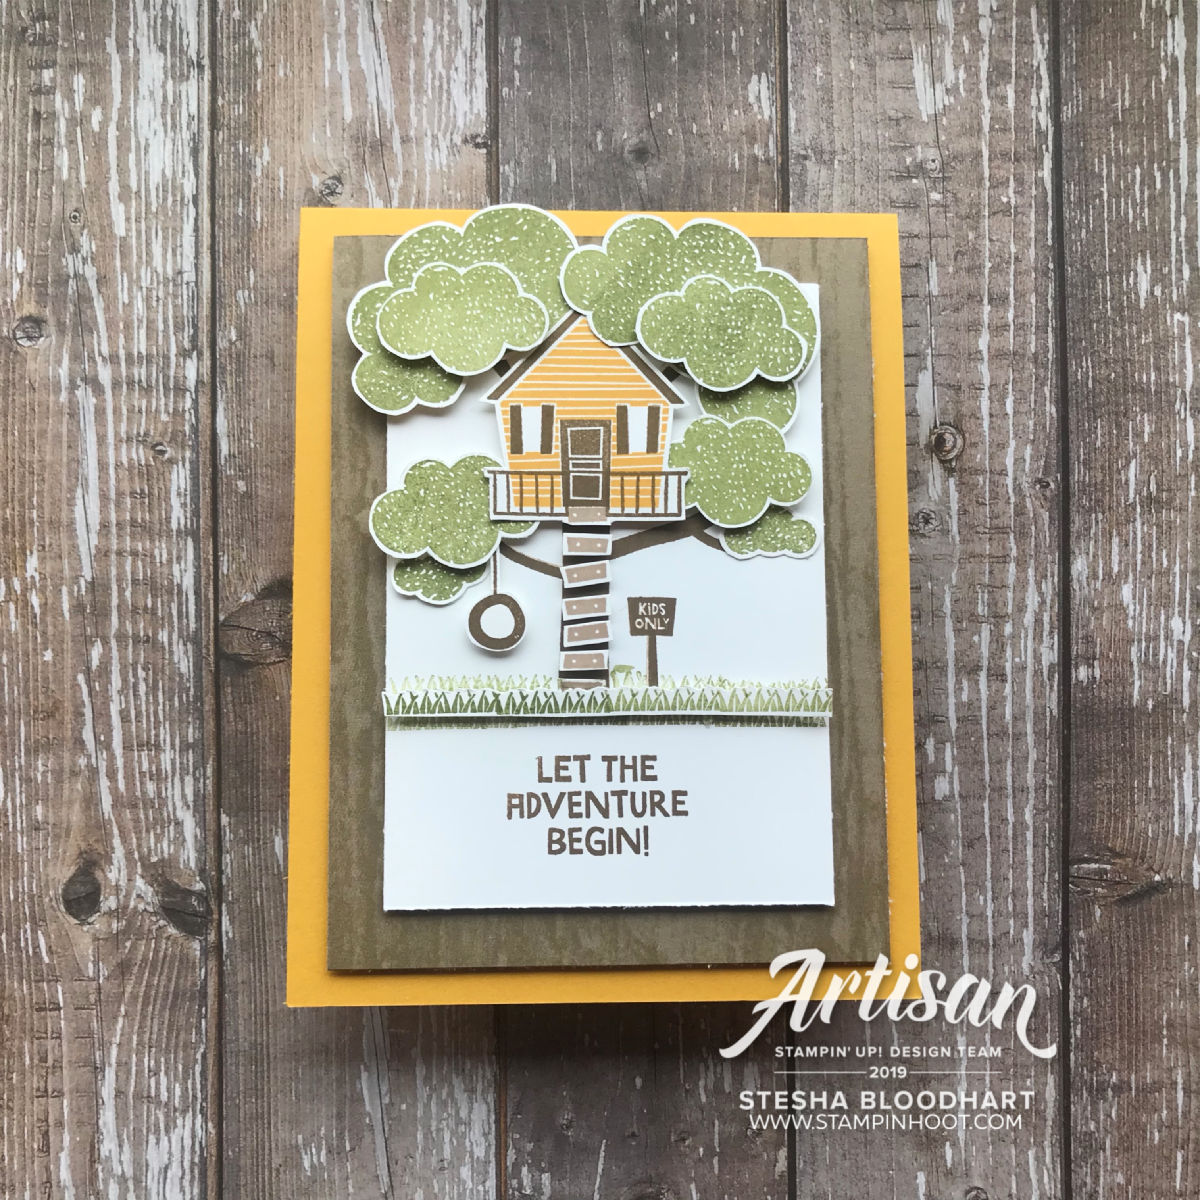 Treehouse Adventure Stamp Set by Stampin' Up! Card created by Stesha Bloodhart, Stampin' Hoot! #steshabloodhart #stampinhoot